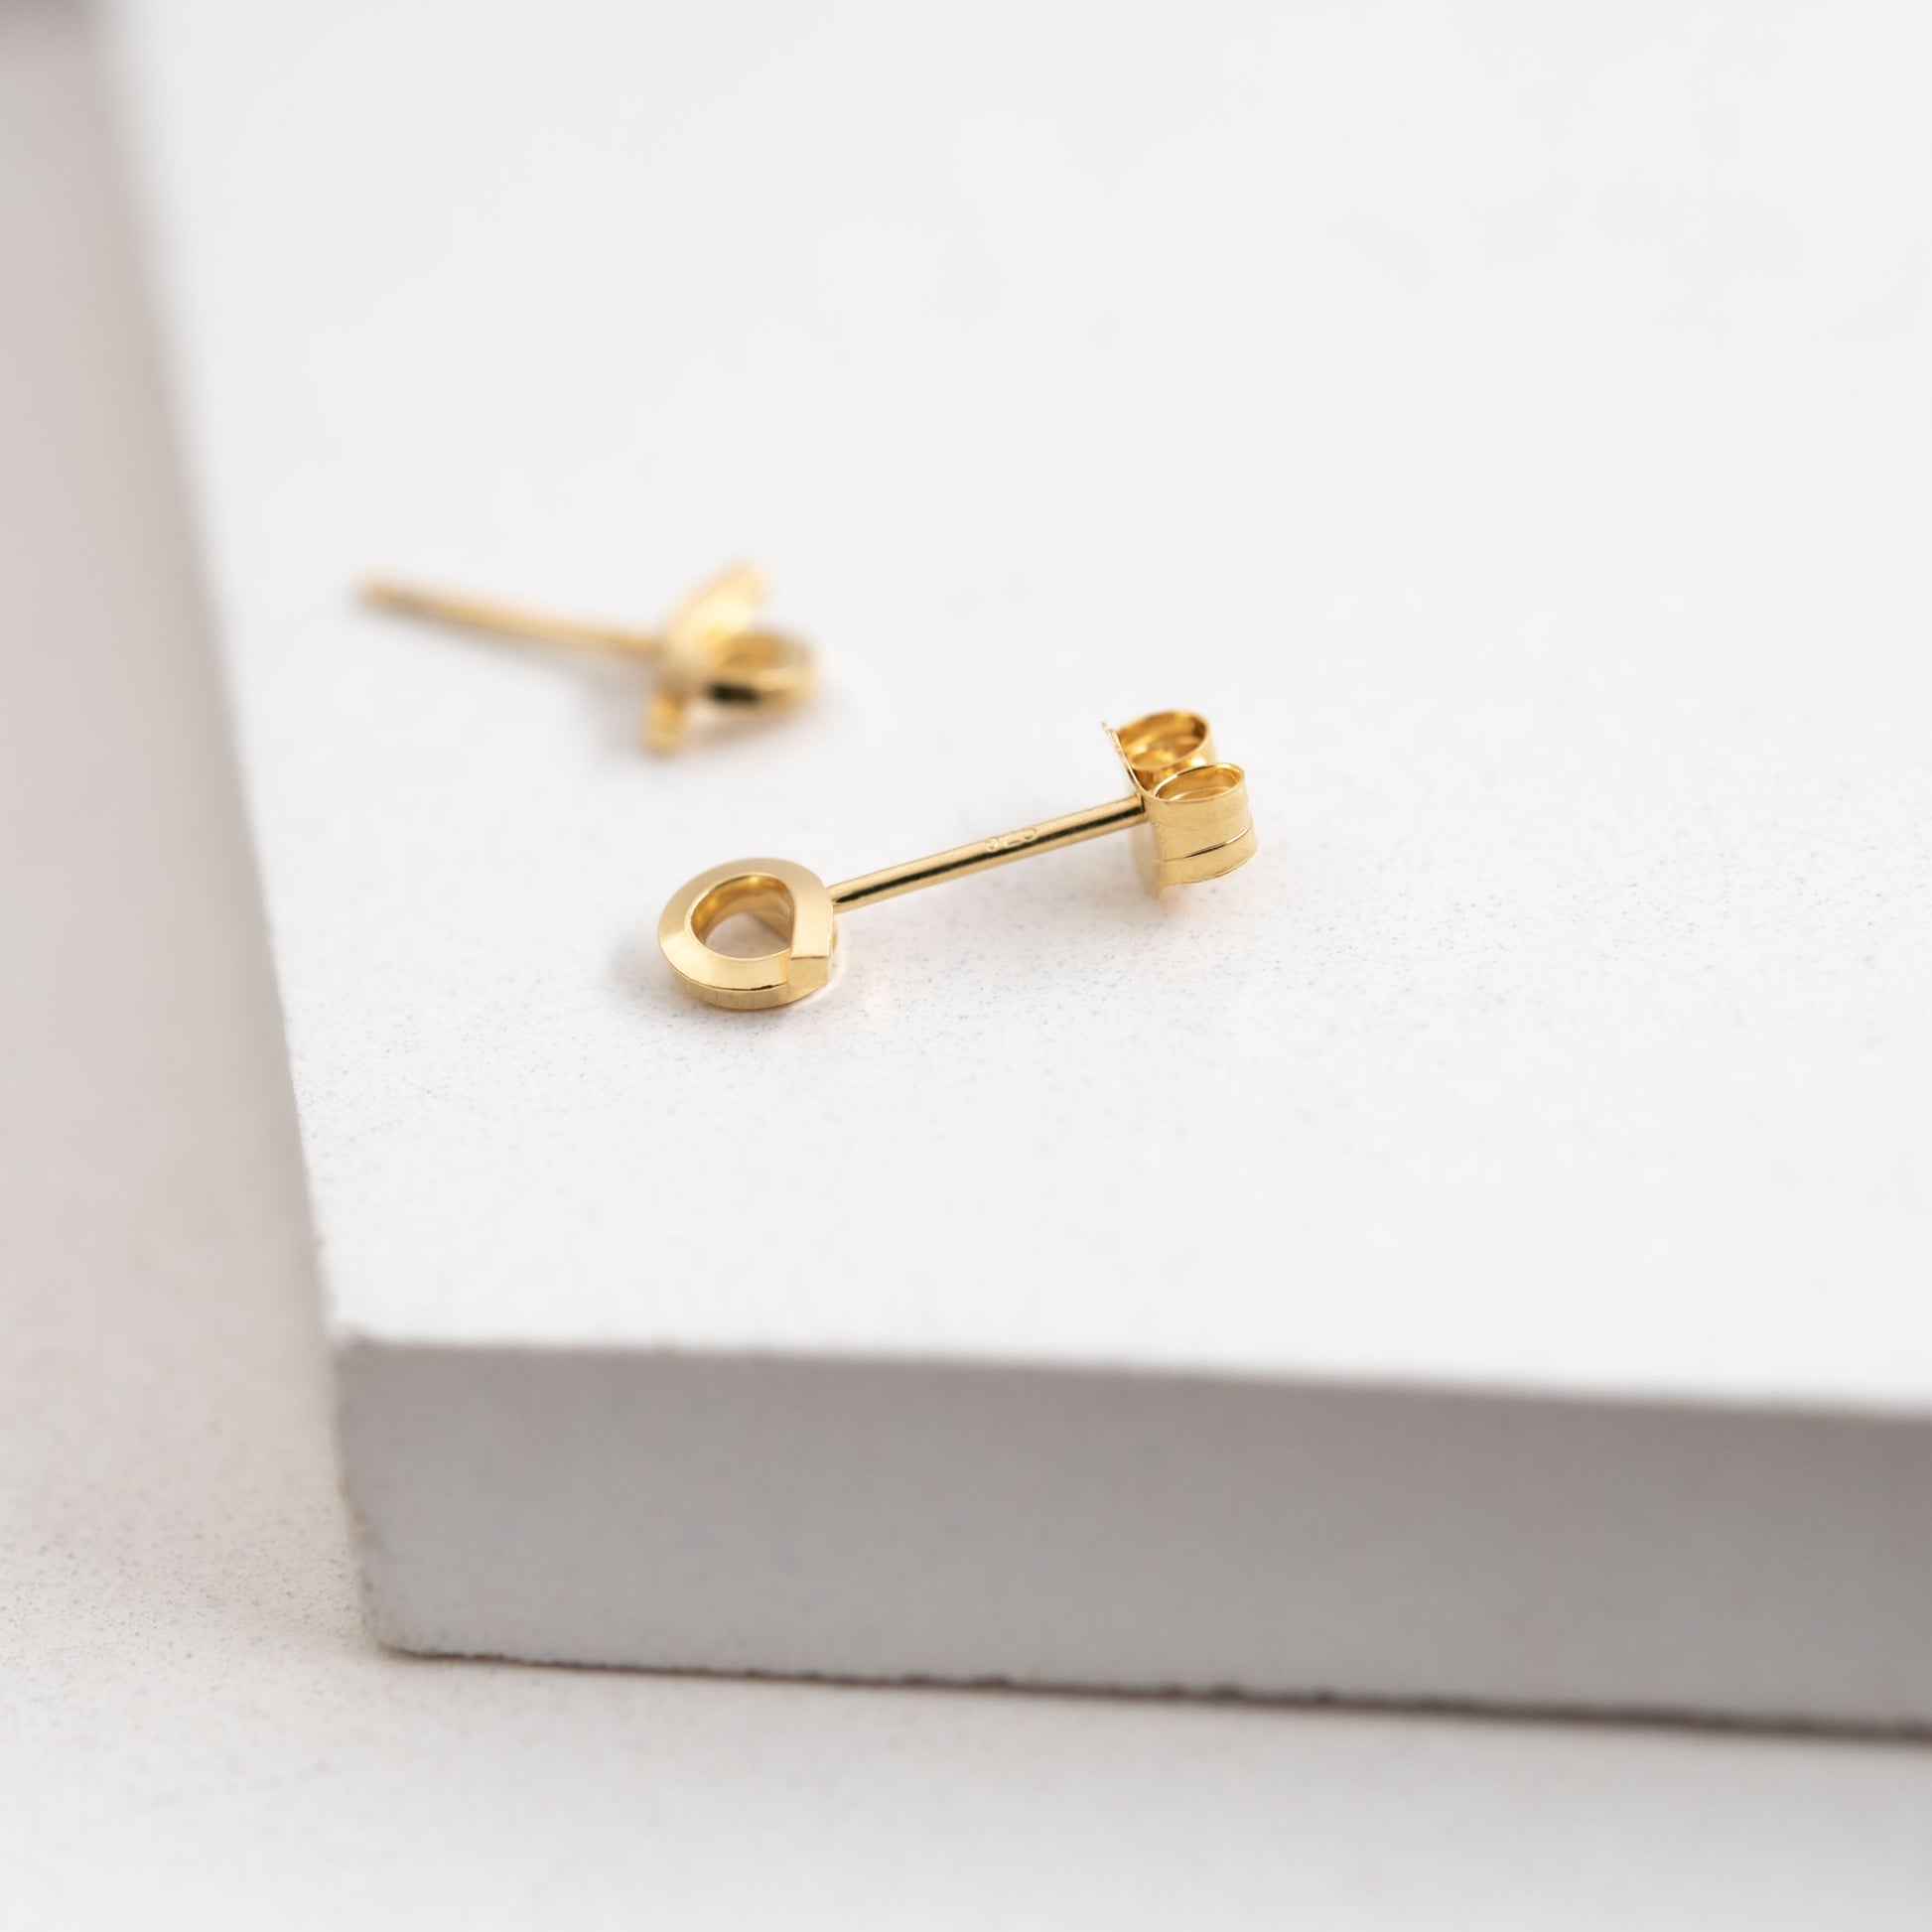 Tiny loop studs earrings crafted by hand from a 1,5 mm square wire of sterling silver and then shiny finished and gold plated. Length: 5 Millimeters; Width: 7 Millimeters